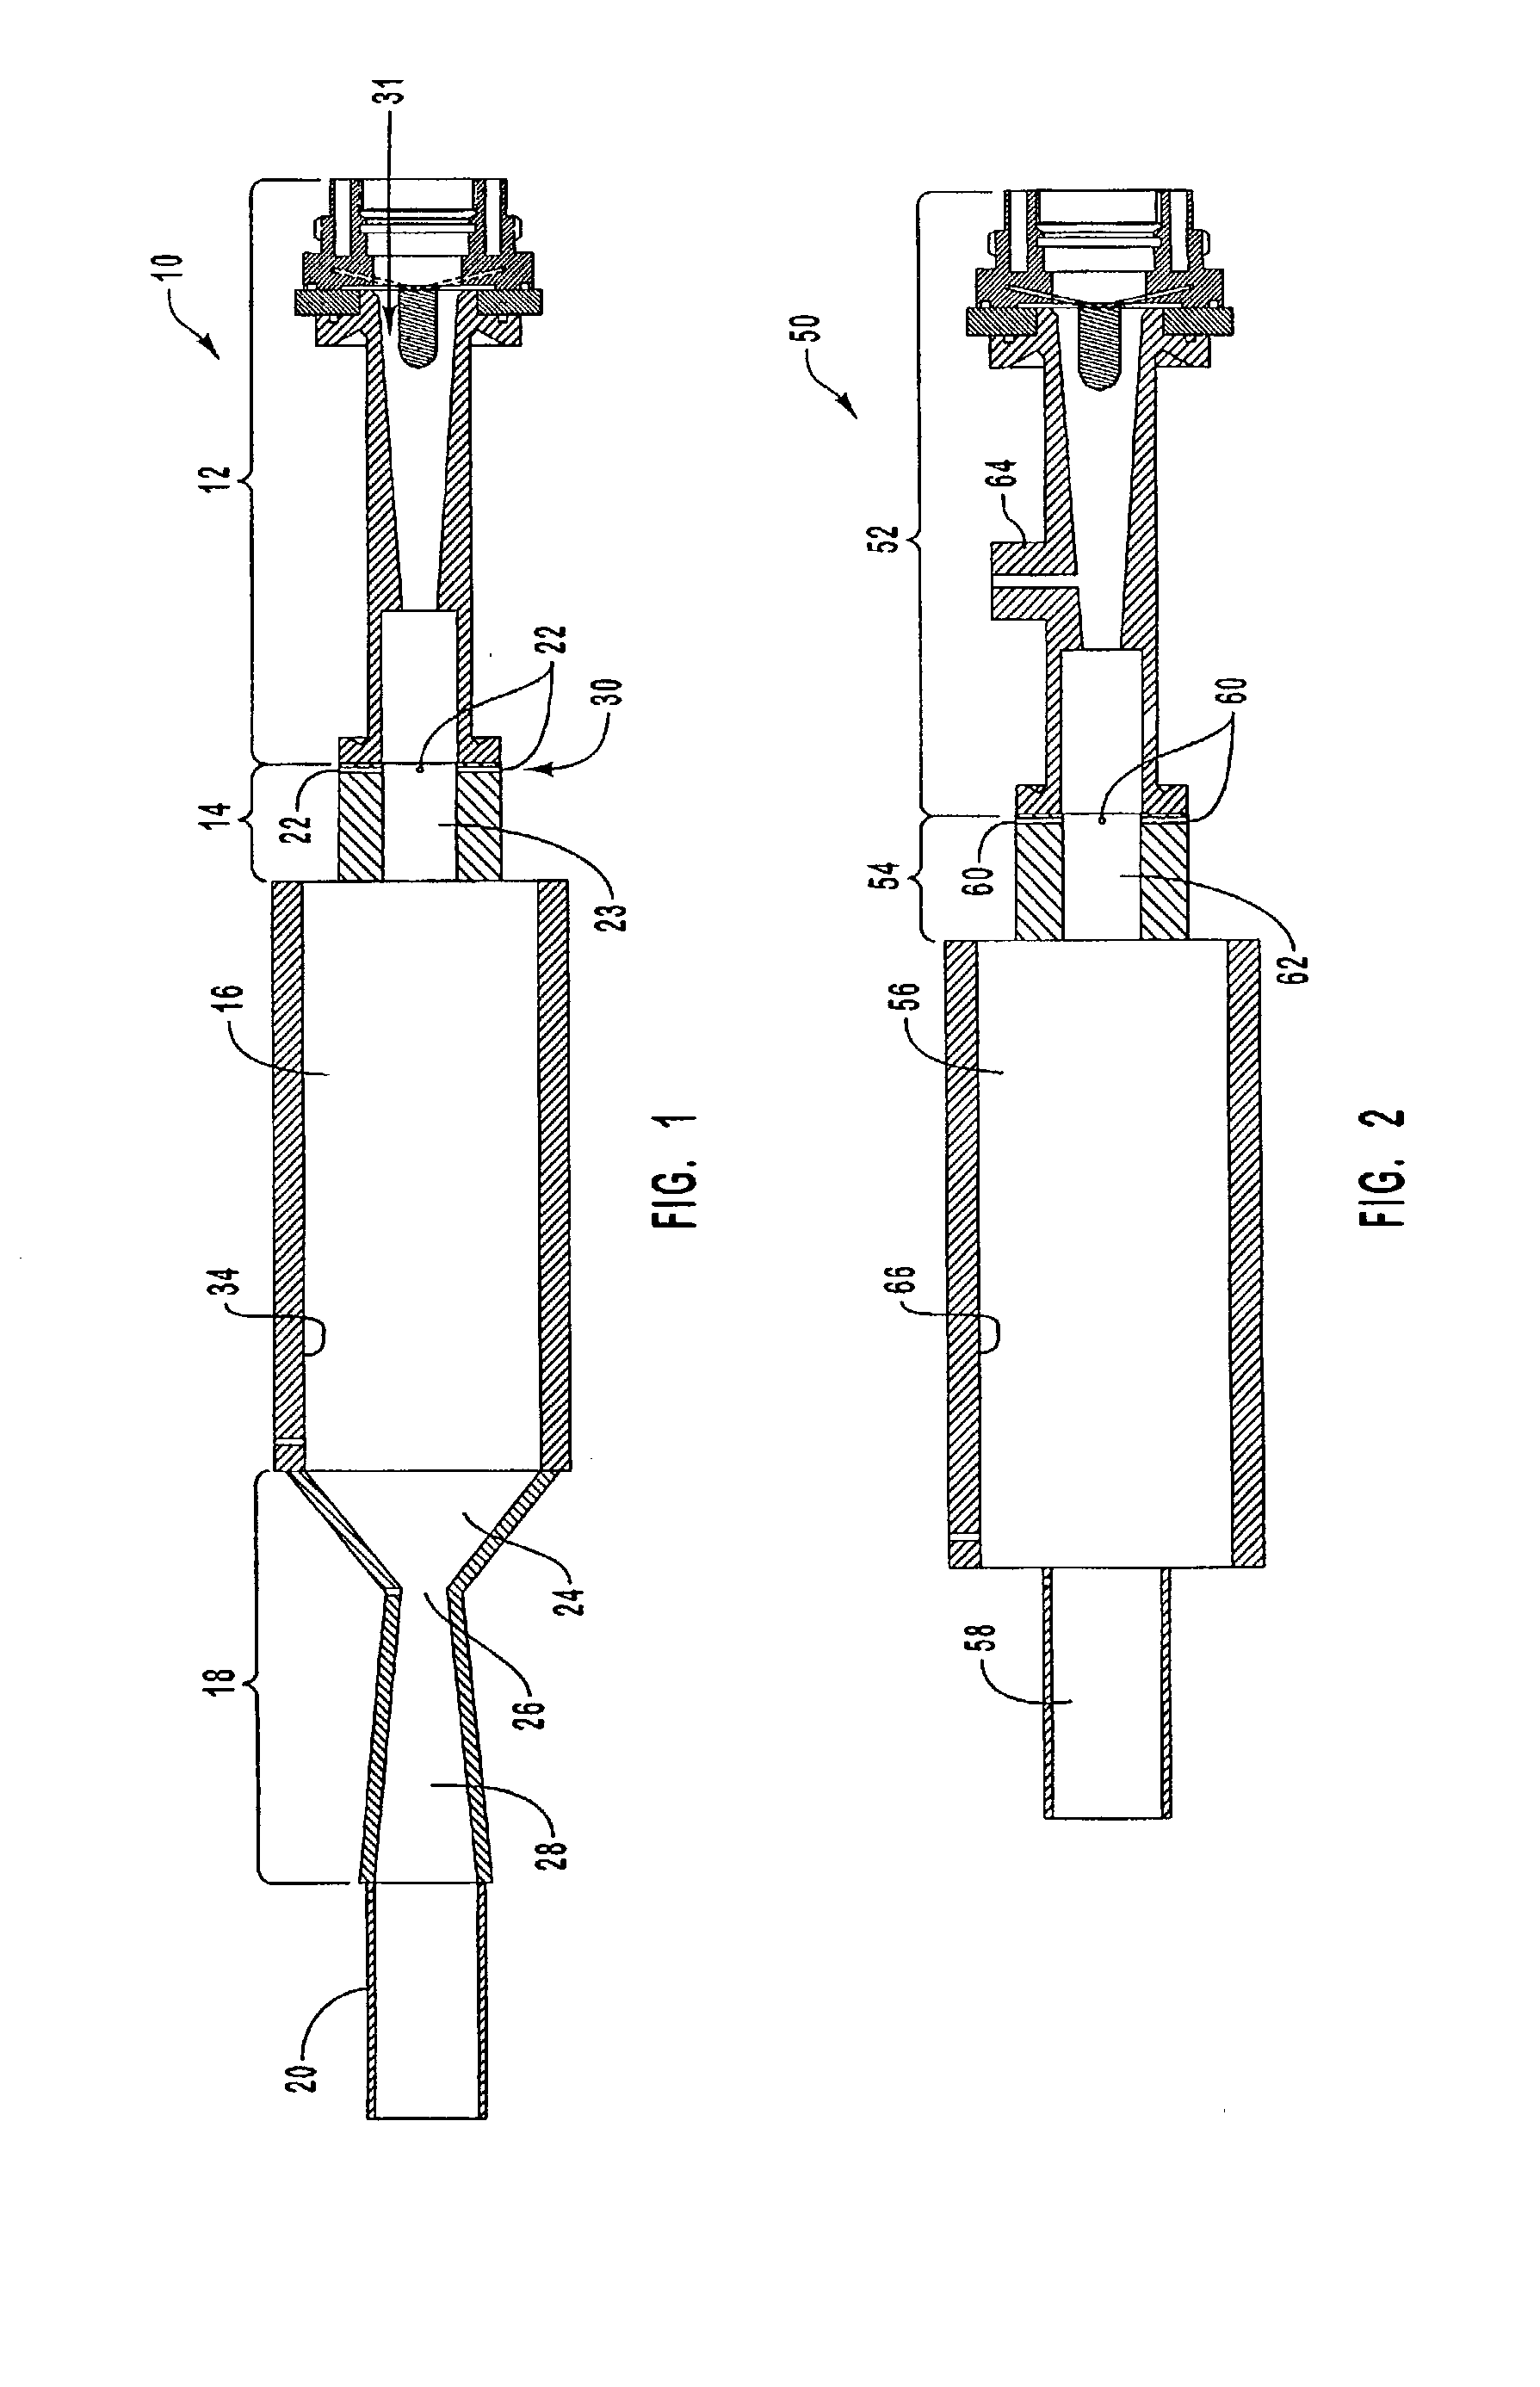 Thermal synthesis apparatus and process